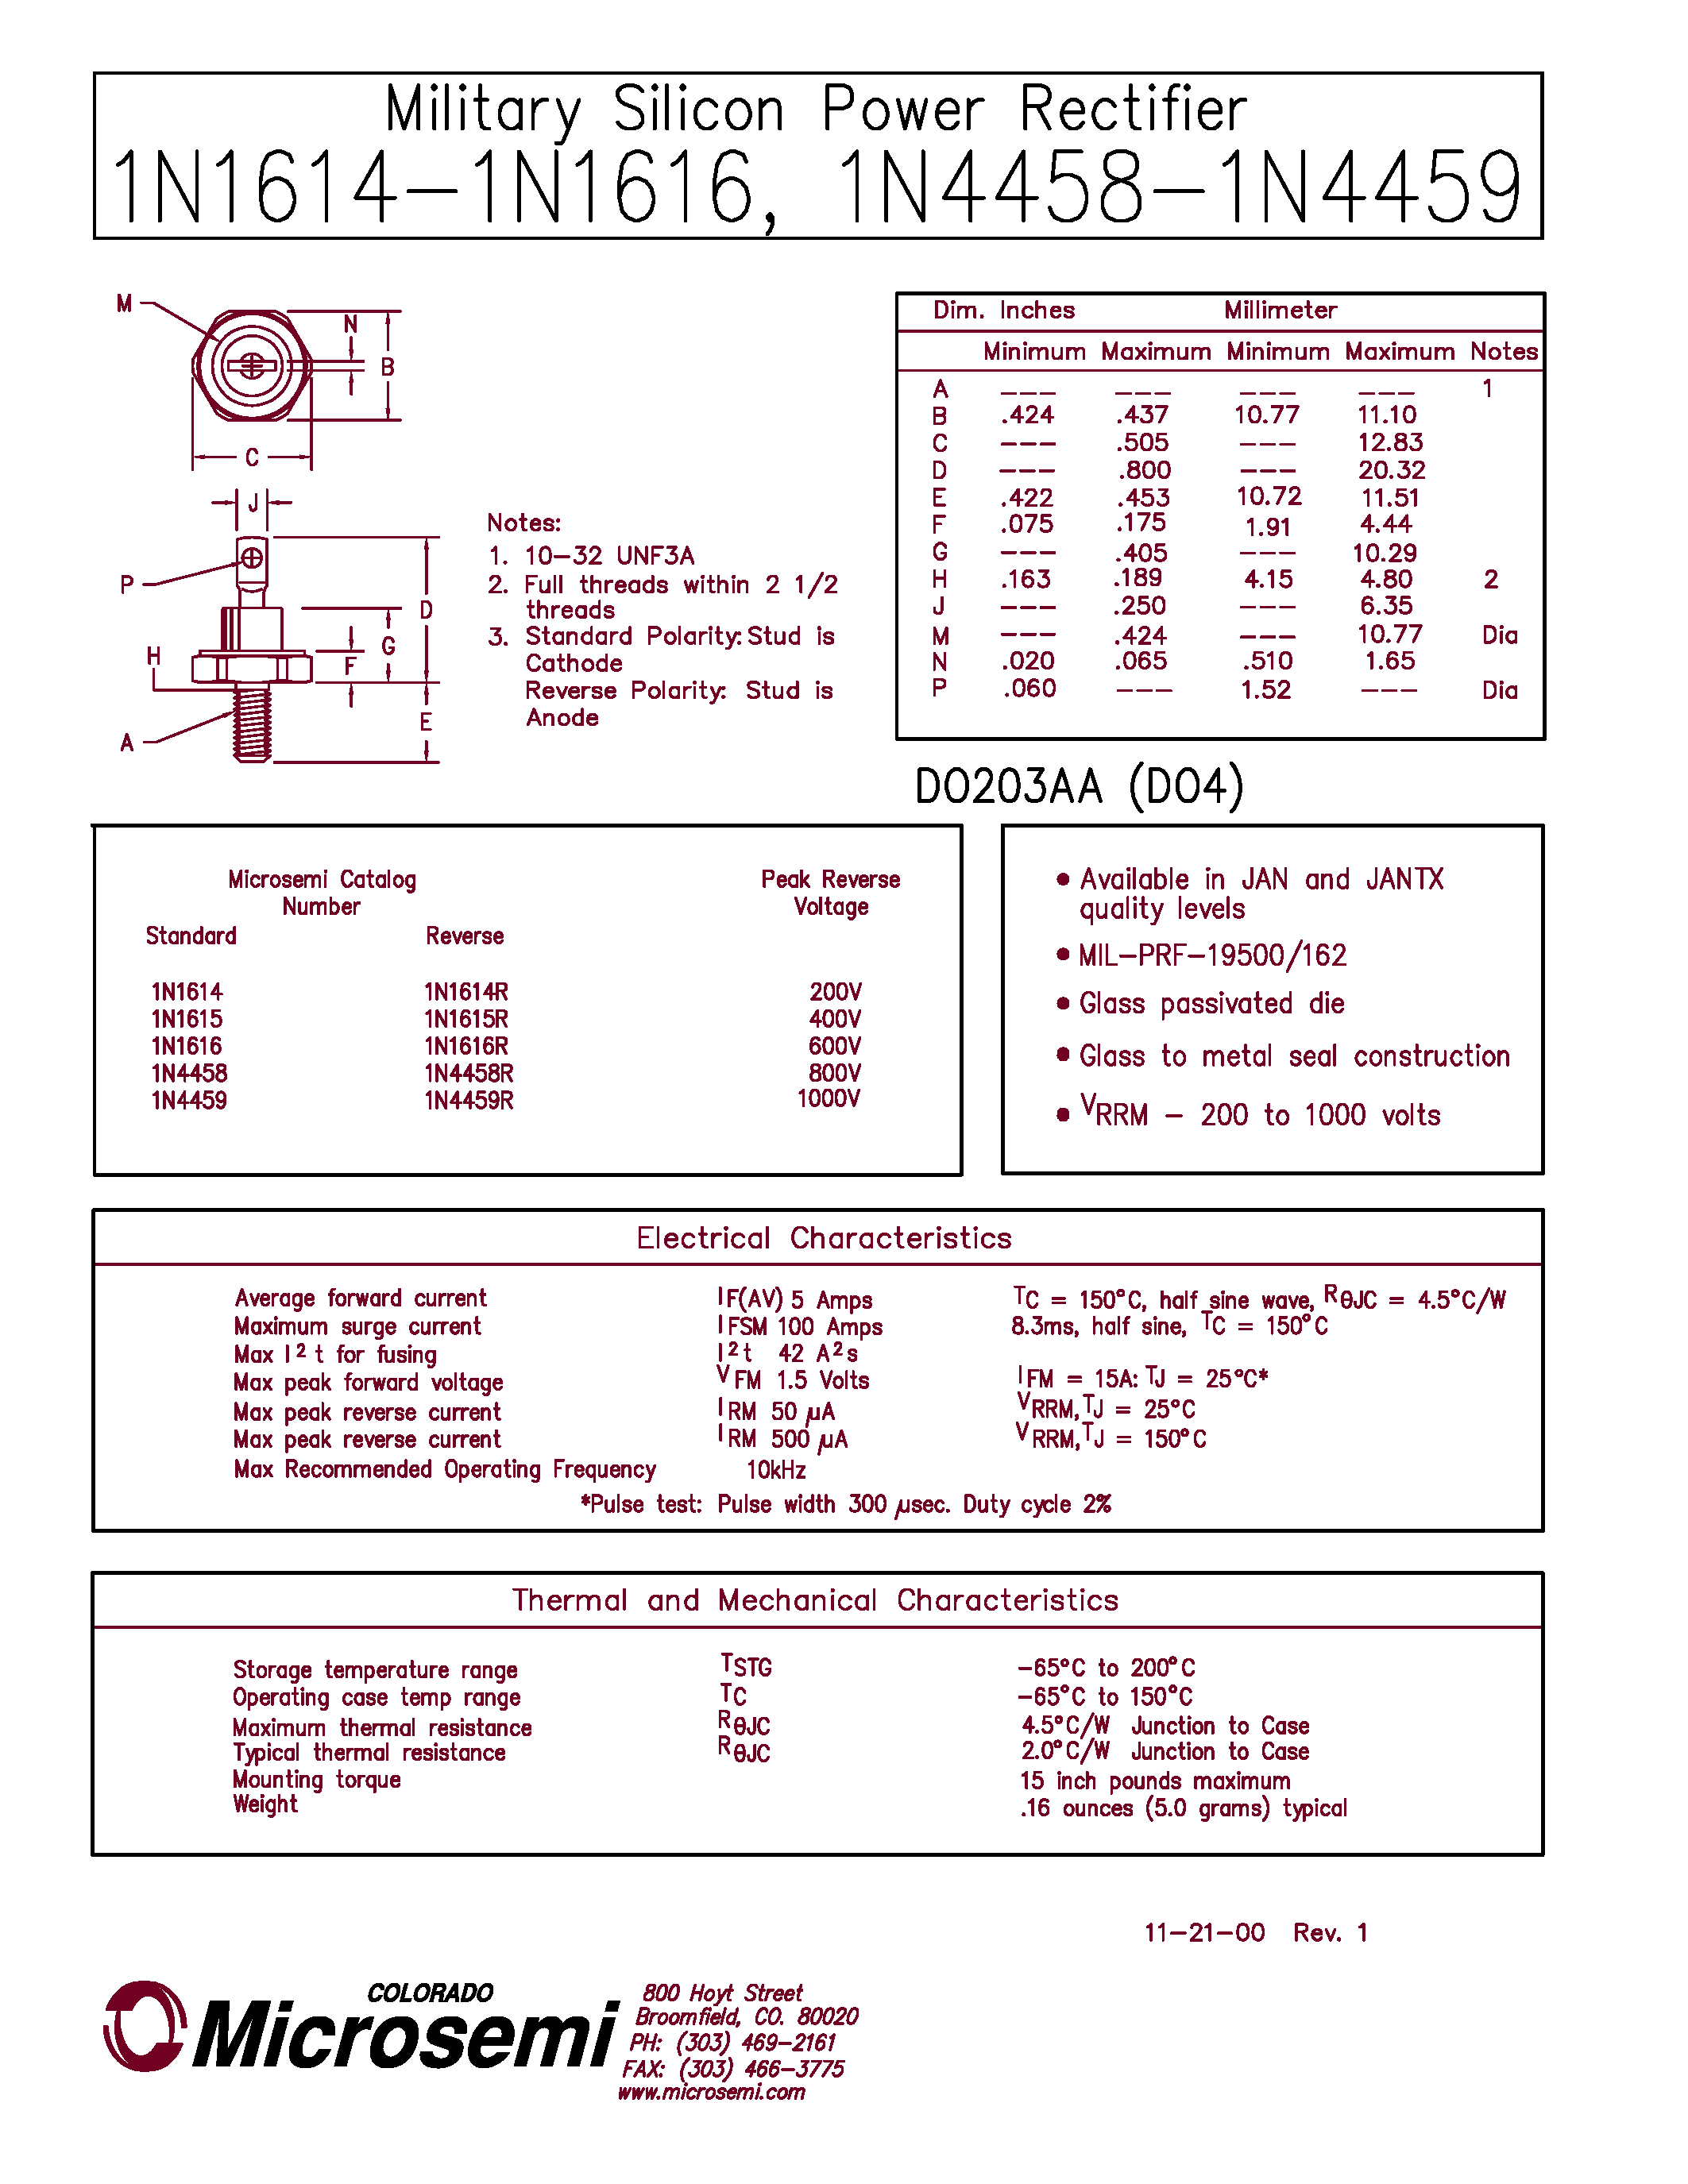 Datasheet 1N1616R - Military Silicon Power Rectifier page 1